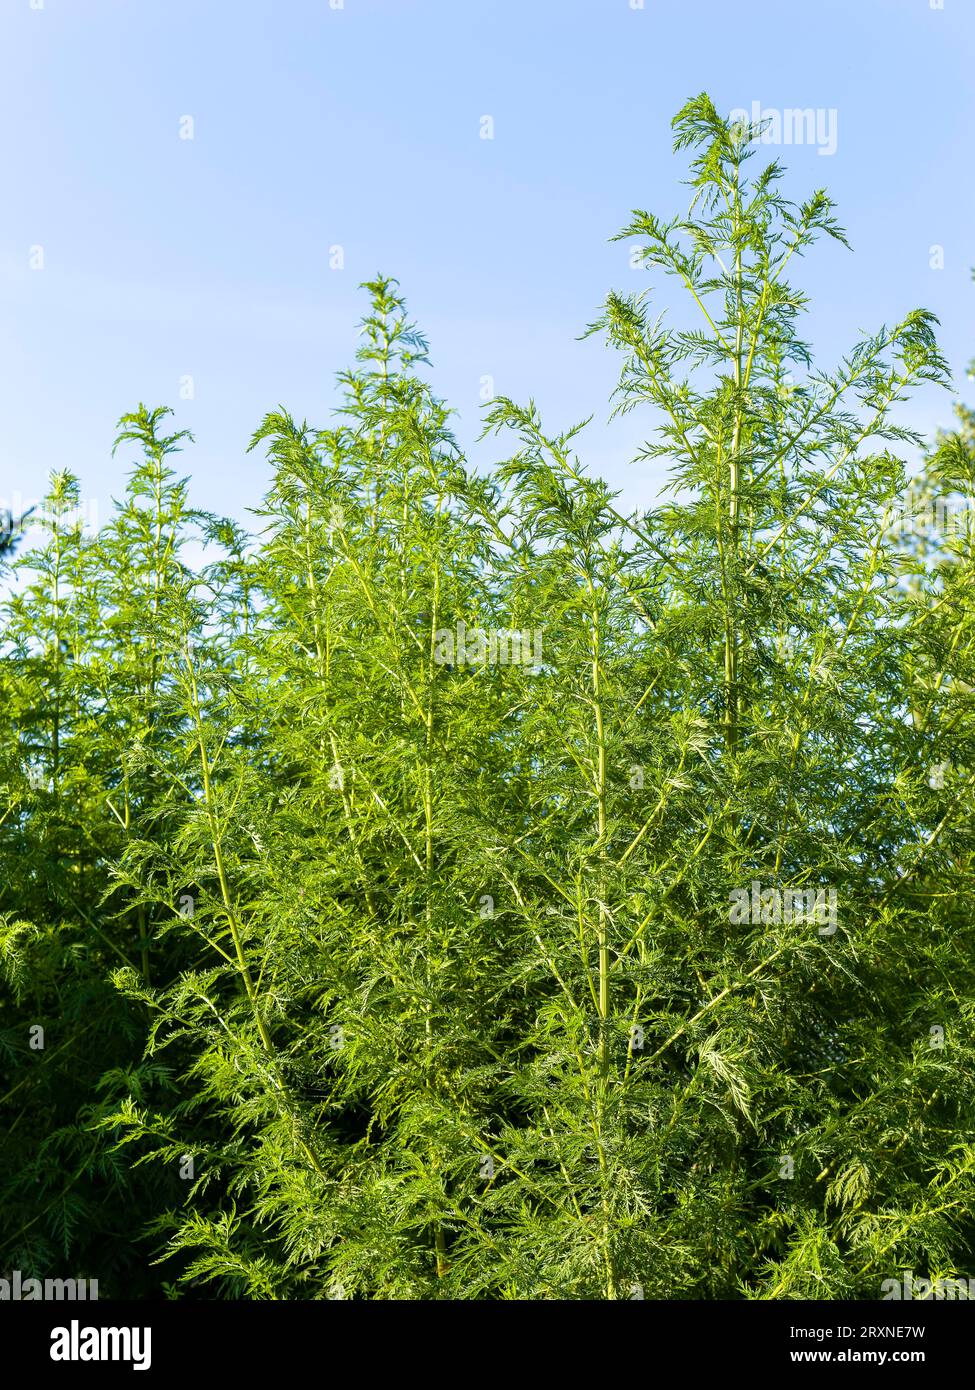 Sweet annie (Artemisia annua) Medicinal herbs and wild herbs in the garden Stock Photo